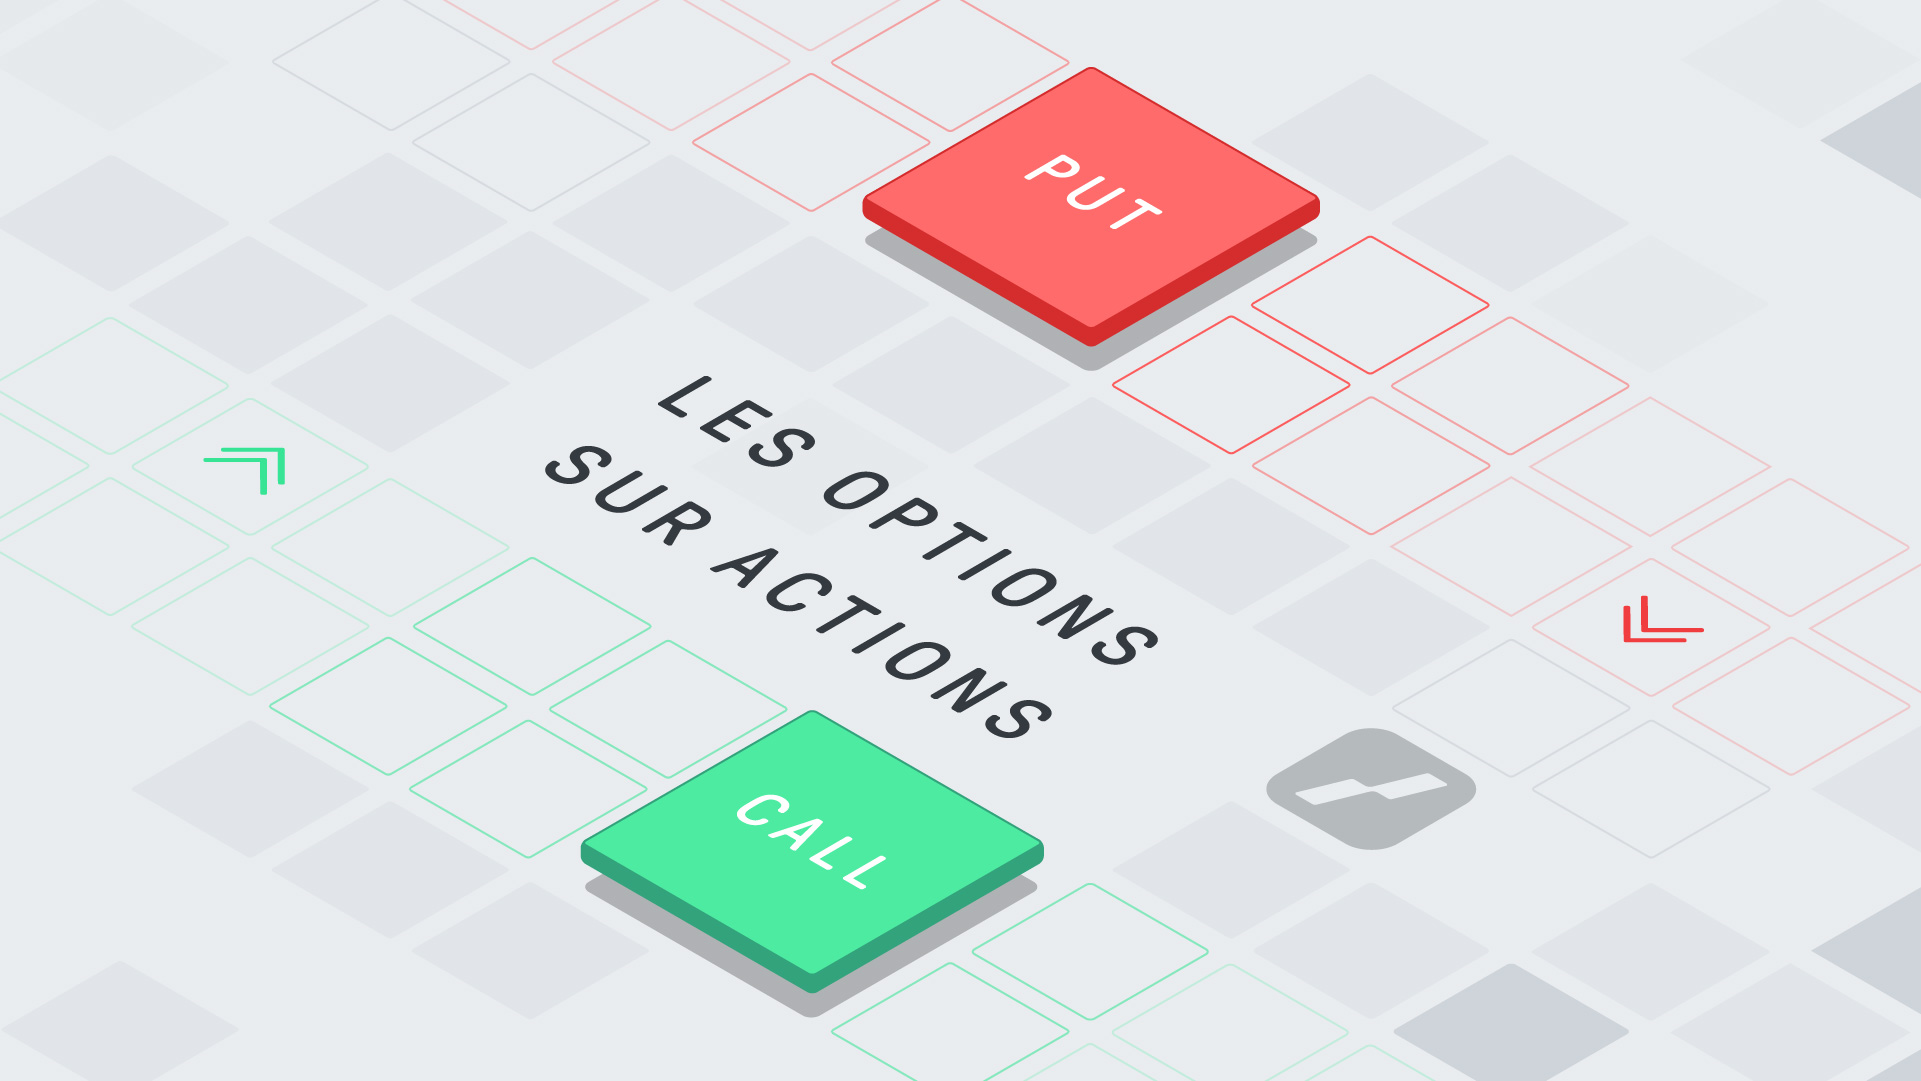 option action - equity option - featured image